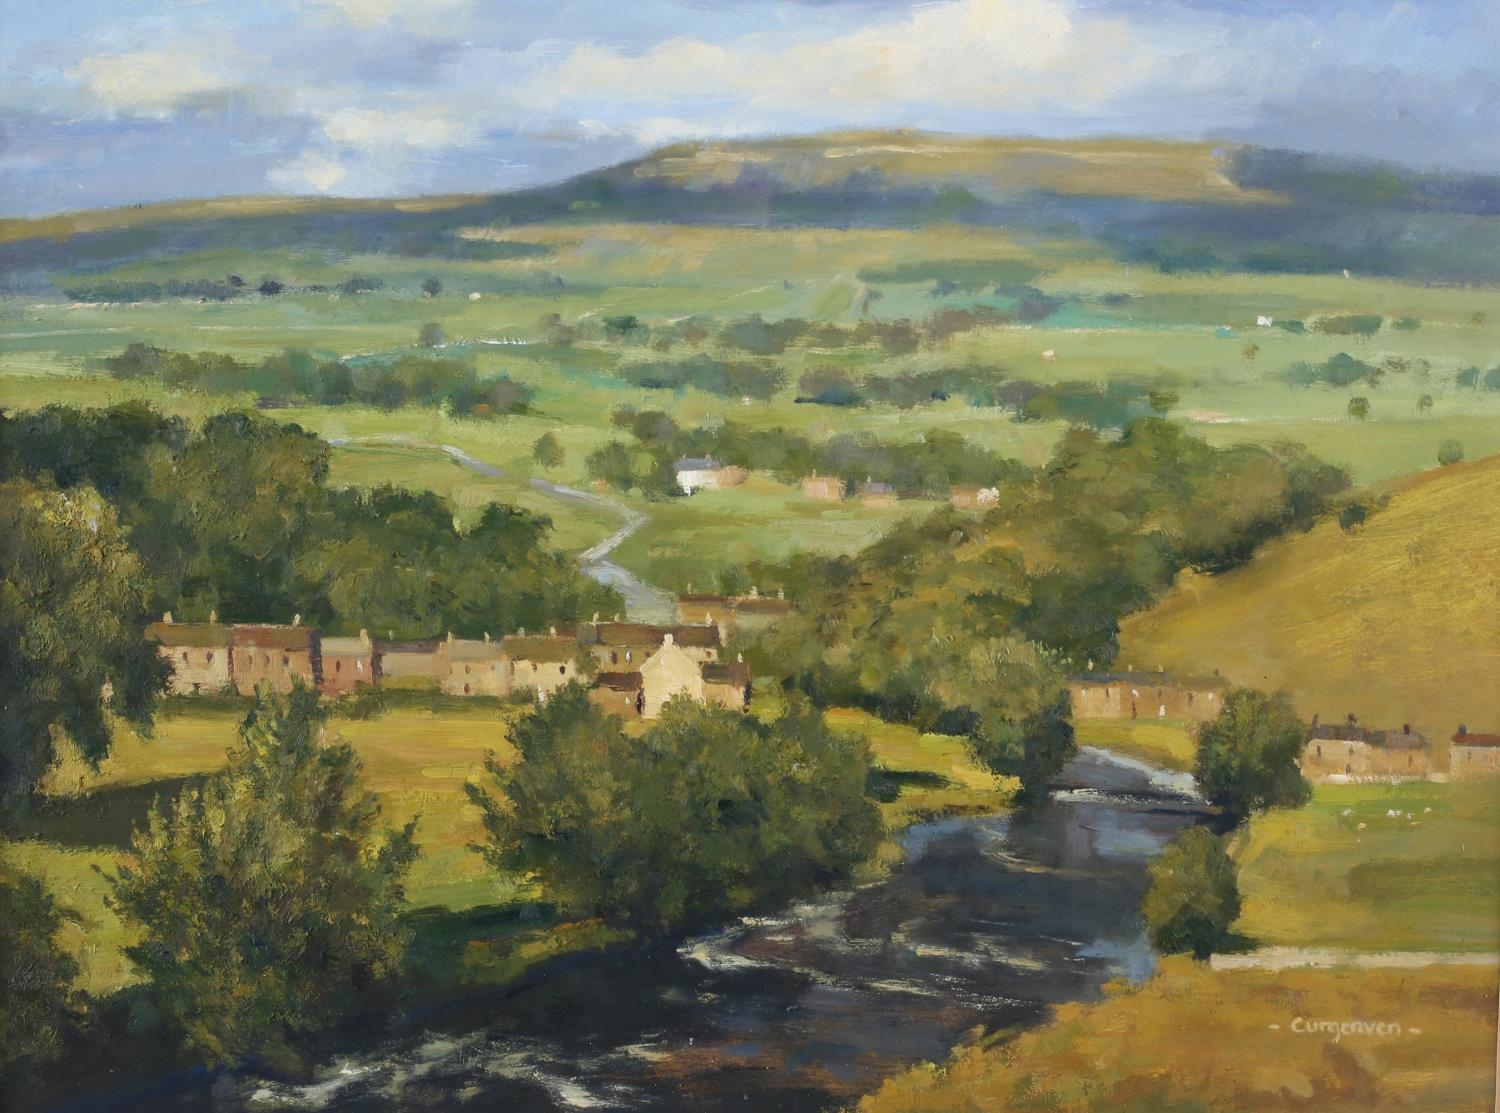 ARR Michael Curgenven (20th/21st century), Kettlewell, North Yorkshire Dales, oil on board, signed